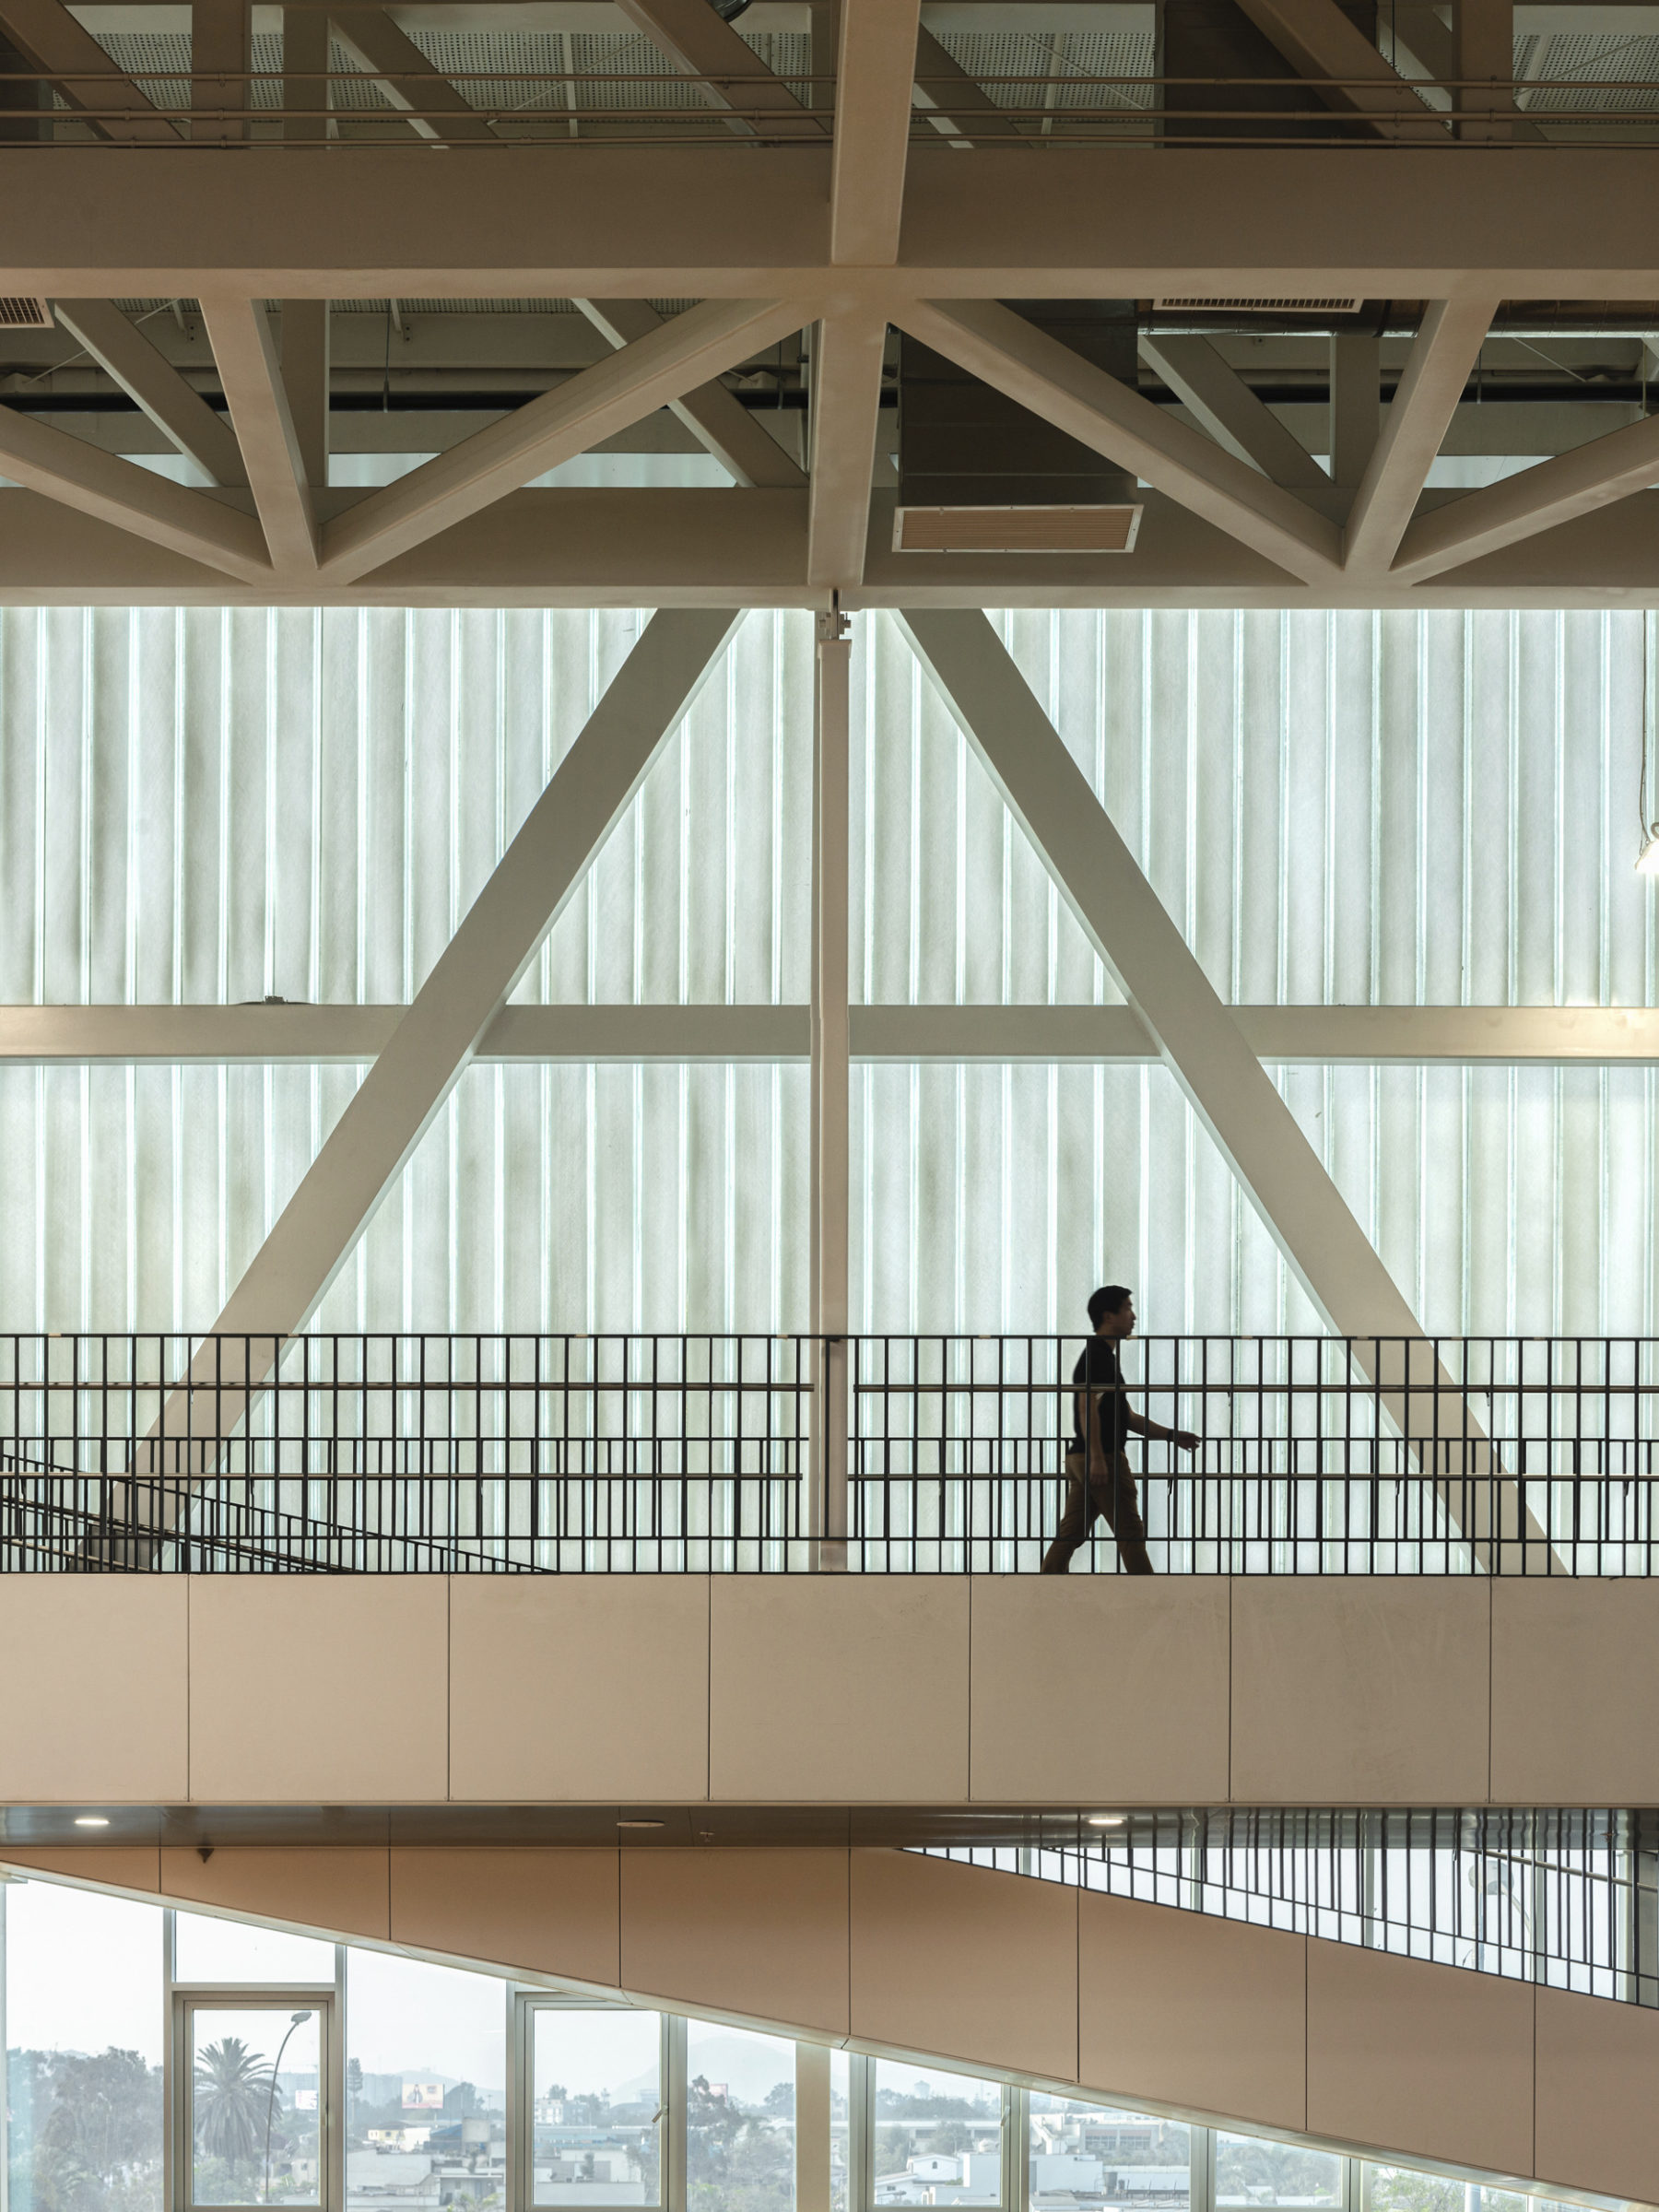 interior photo of a singular student walking on elevated bridge; structural trusses visible in the background